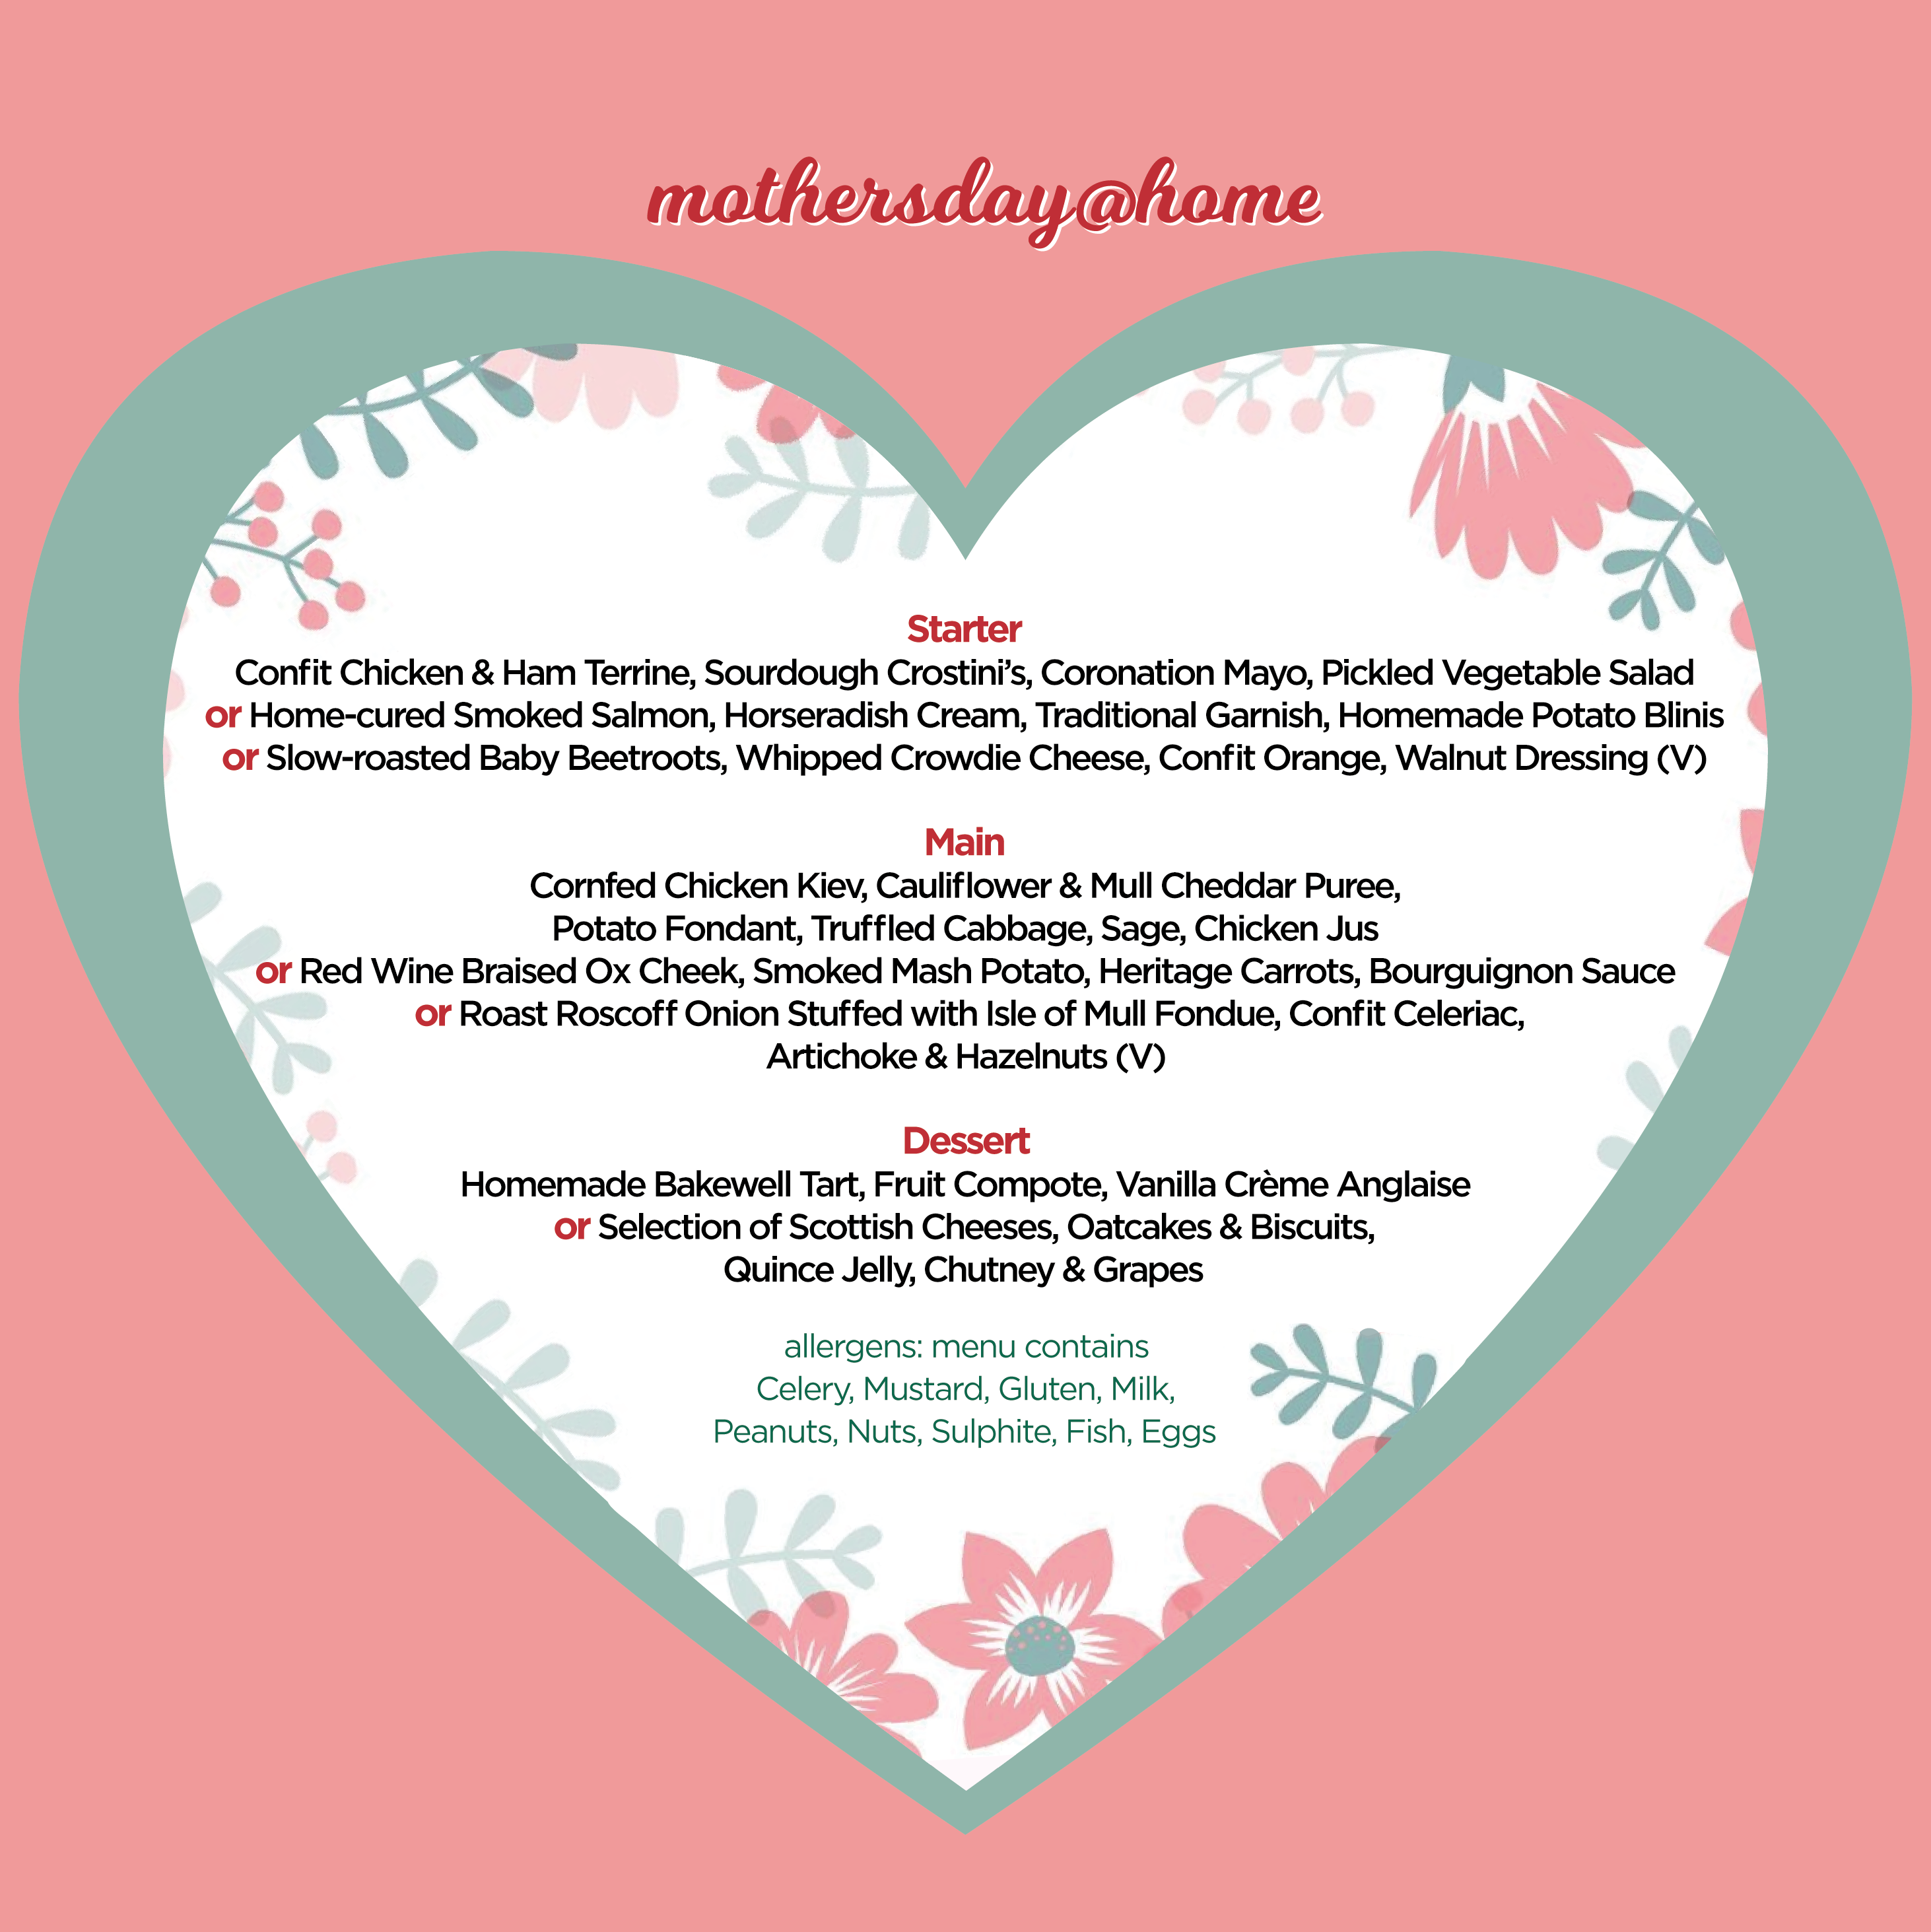 Mother's Day at Home menu